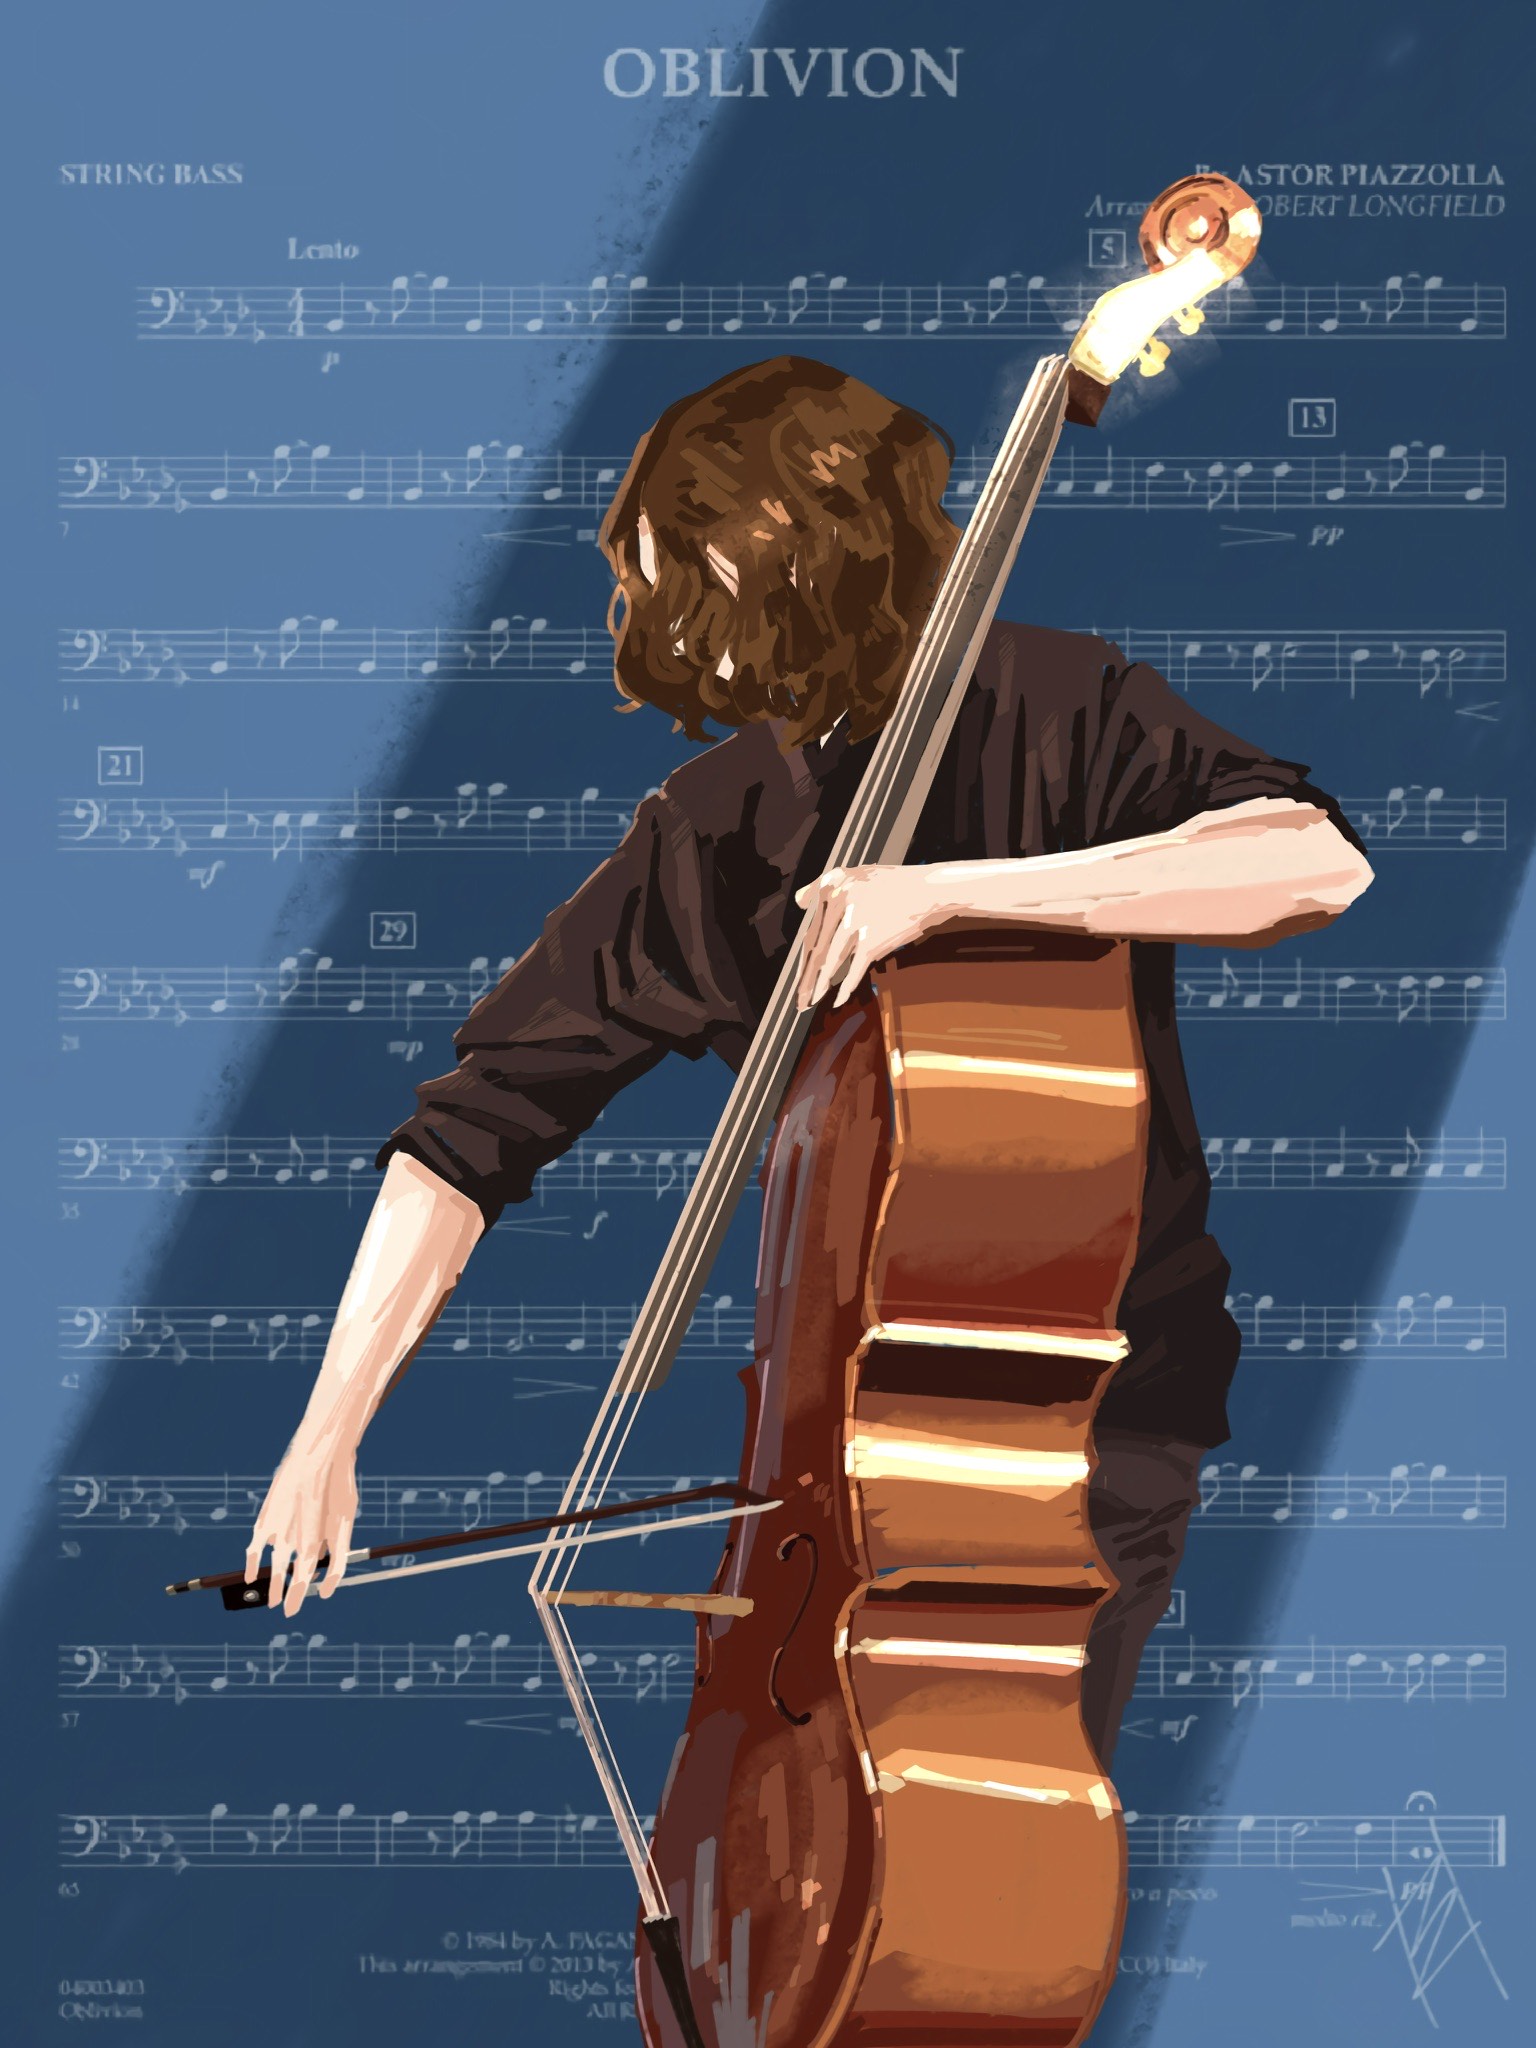 Digital art by Mica Viacrucis: a cellist playing, with a blue background of sheet music titled Oblivion